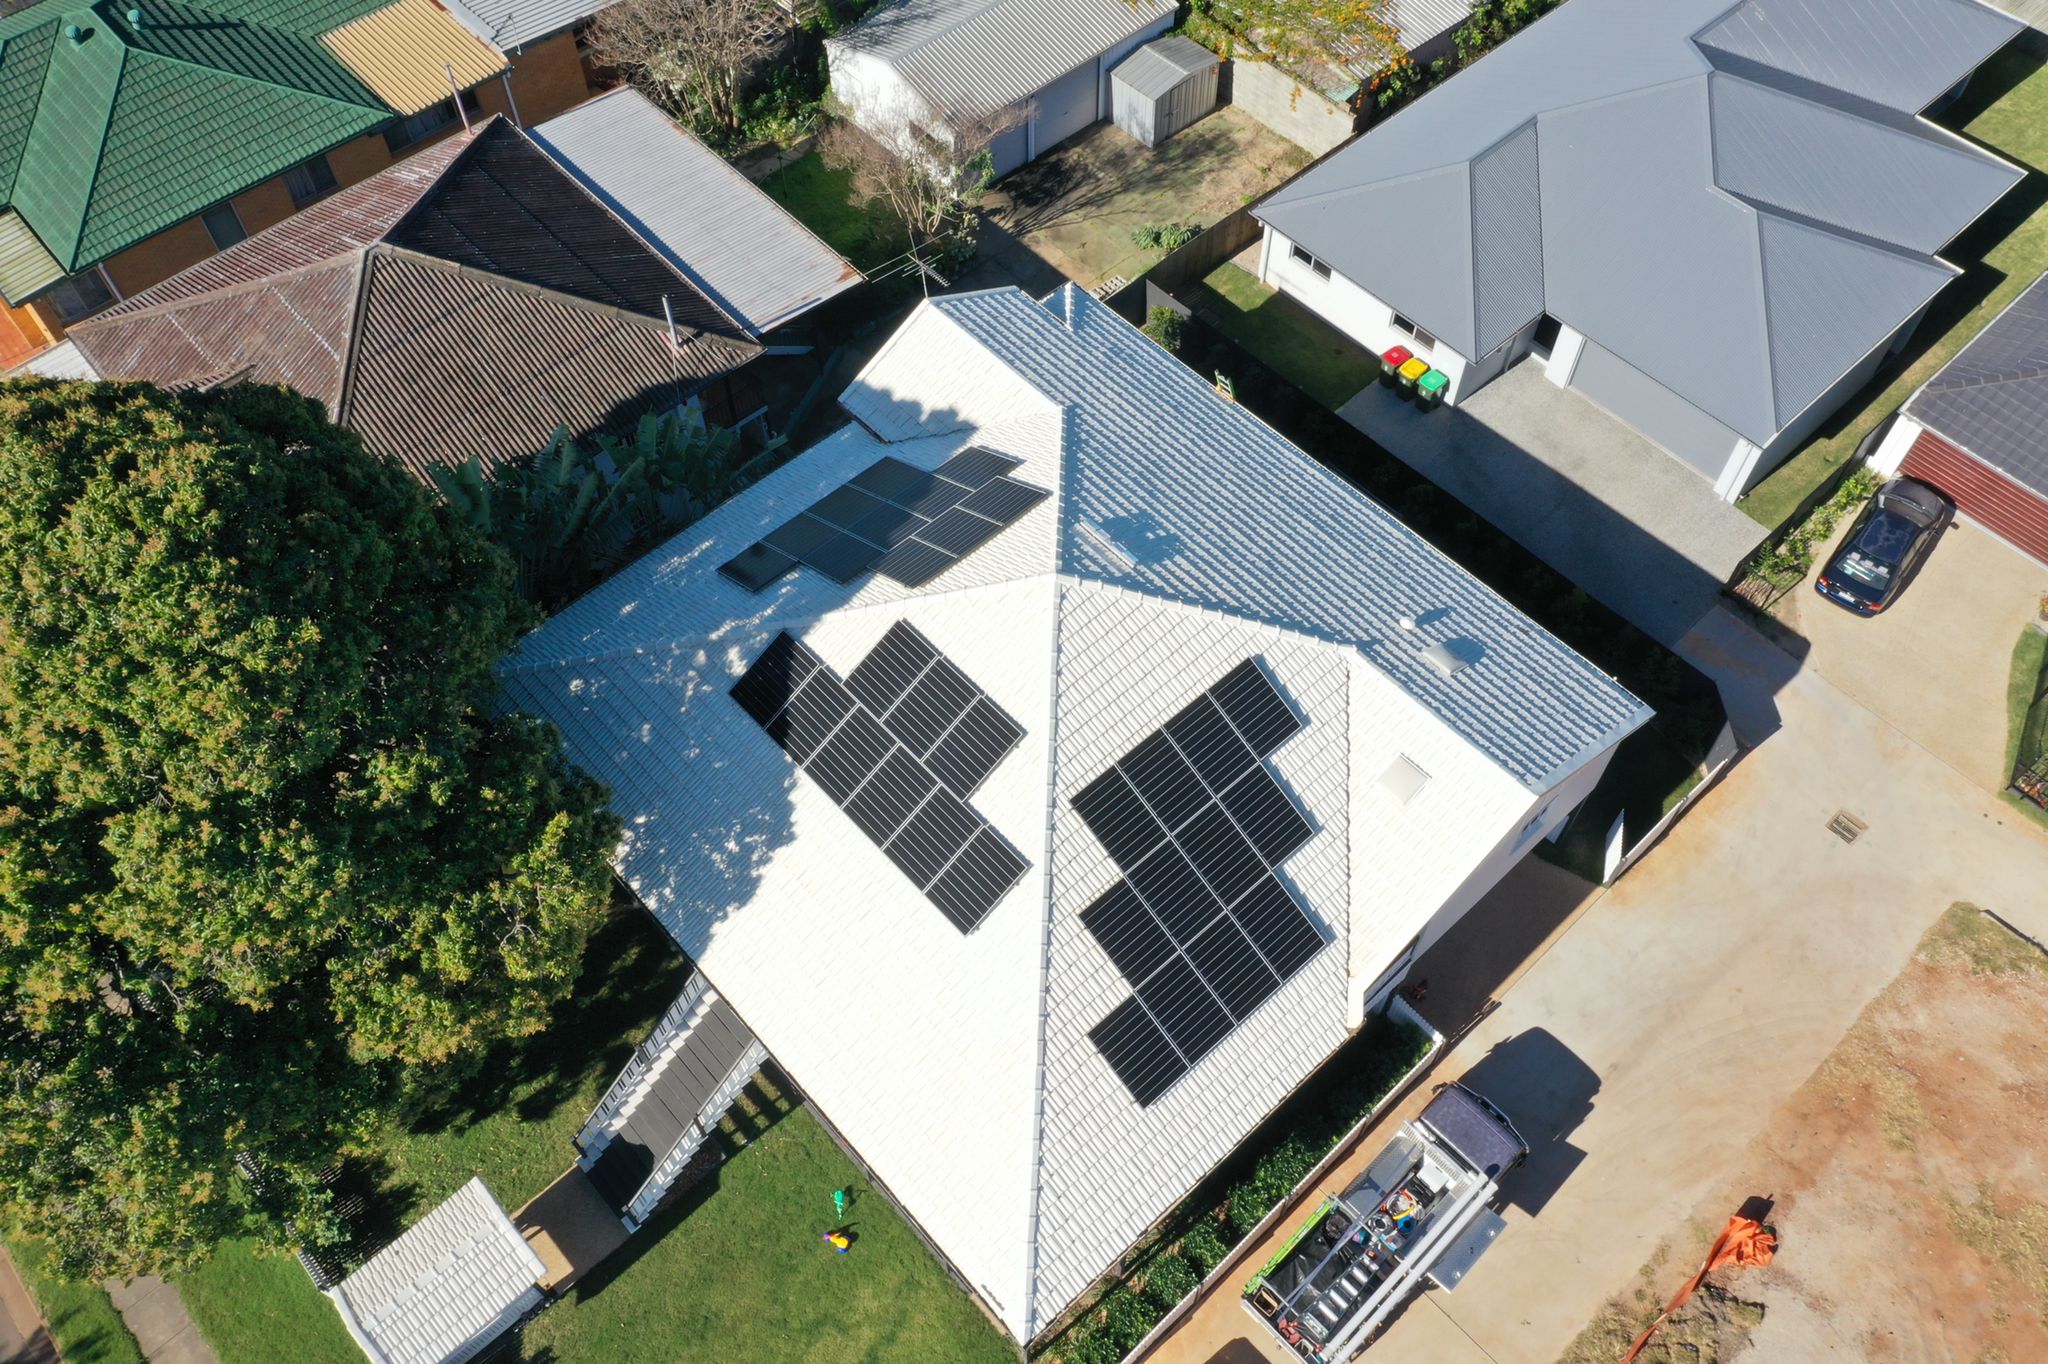 Drone image looking at roof with new solar panels installed by Sunlogics